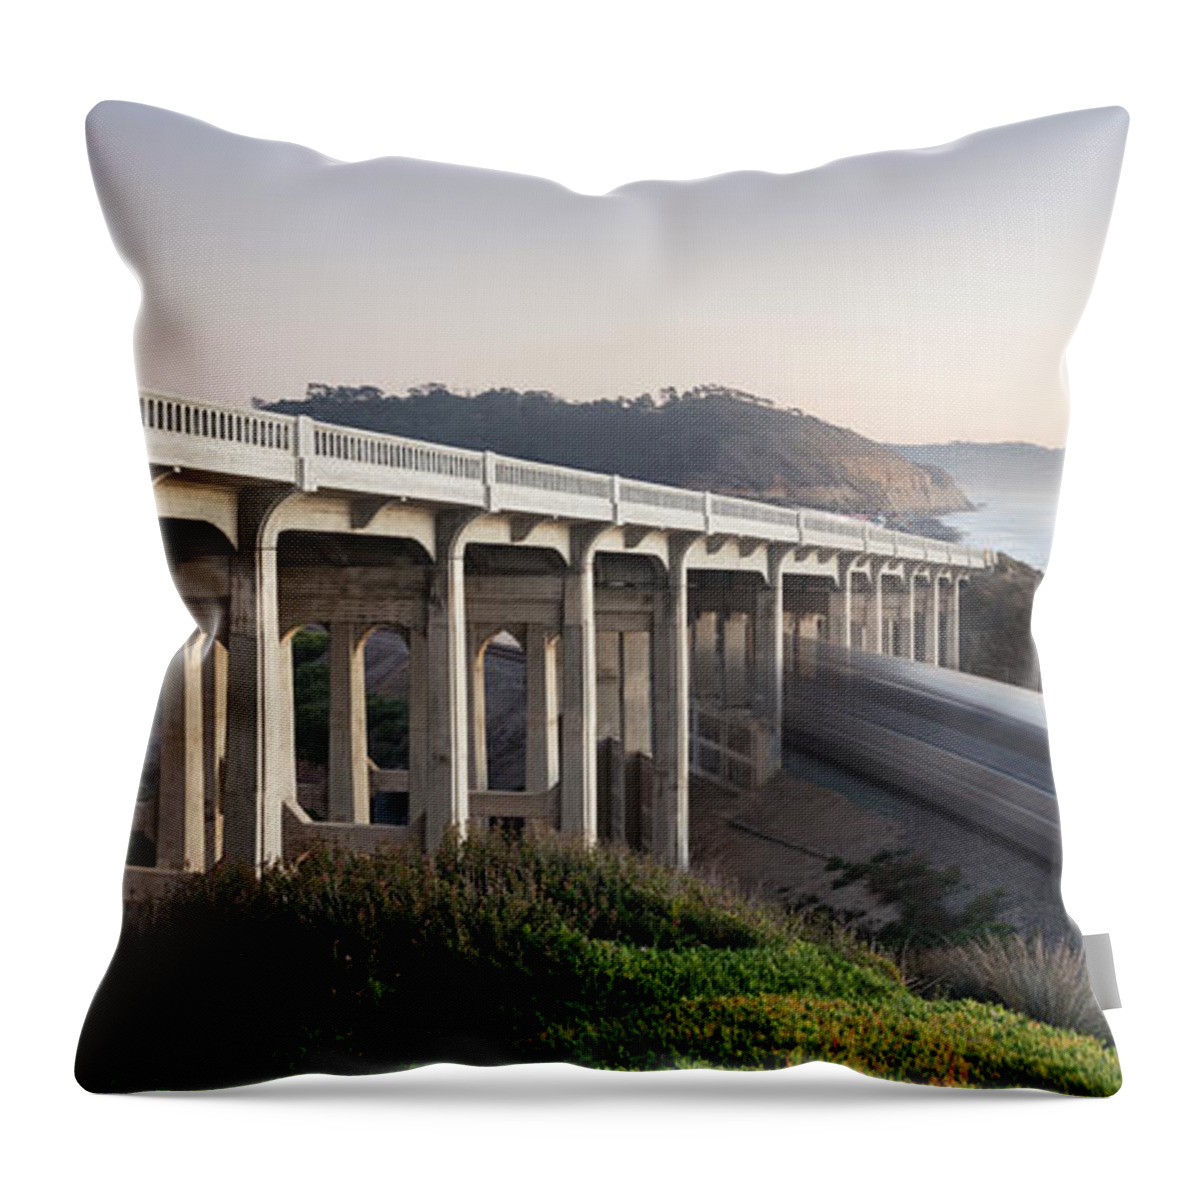 San Diego Throw Pillow featuring the photograph Torrey Pines Bridge and Train by William Dunigan